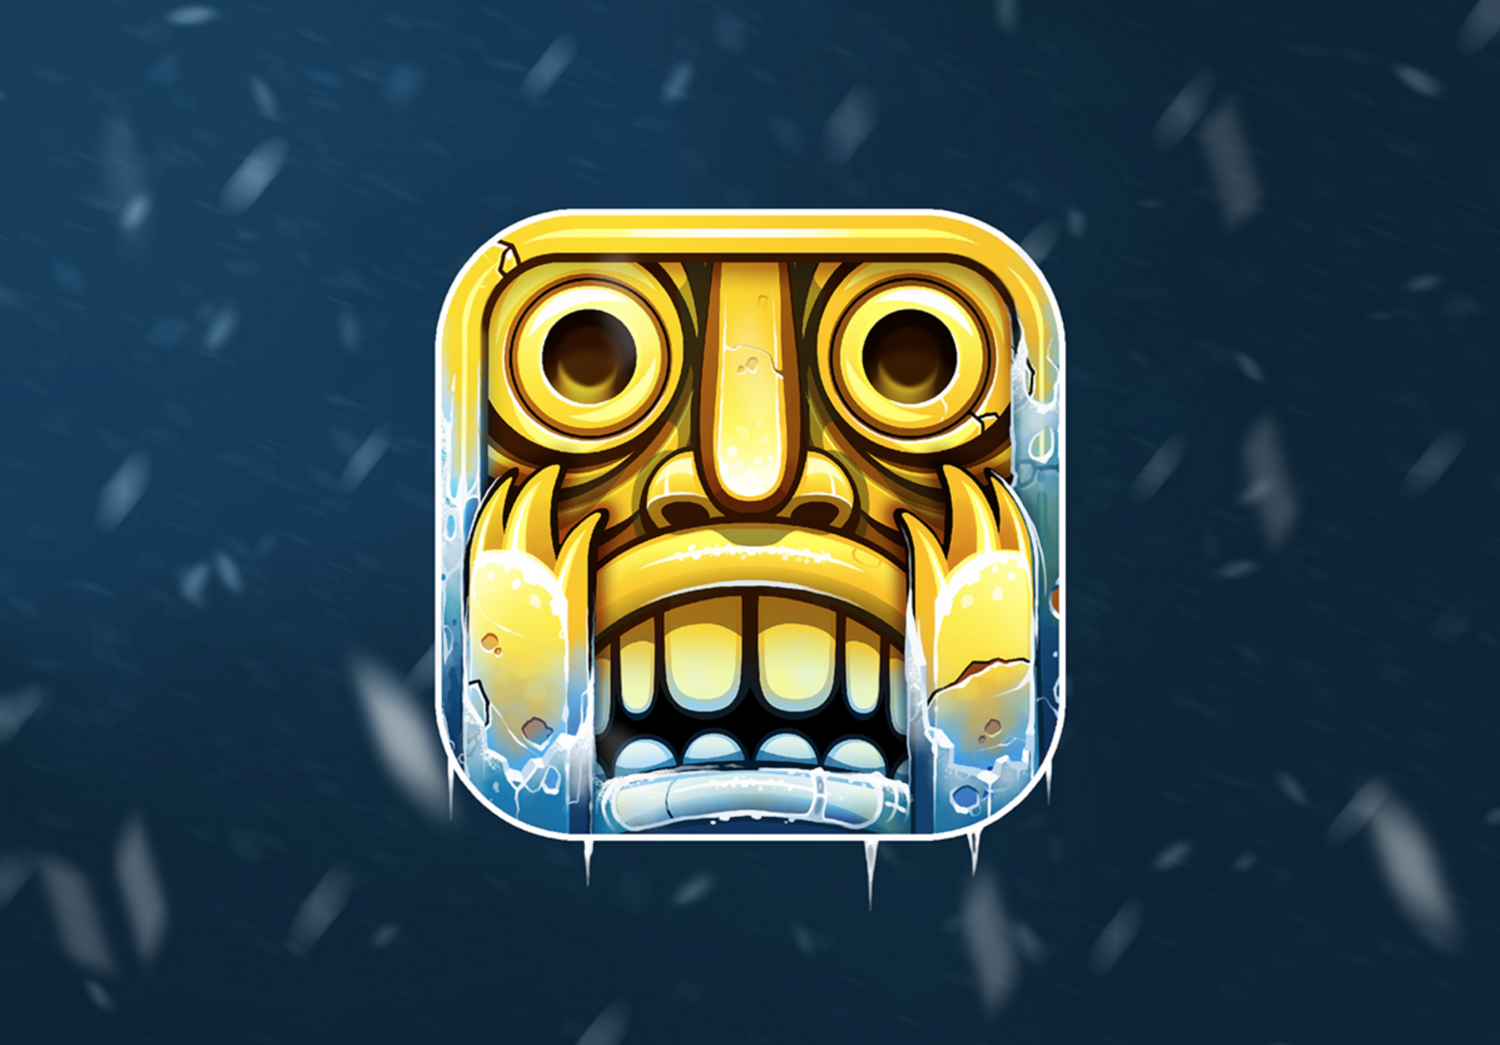 Temple Run 2 Archives - 9to5Mac